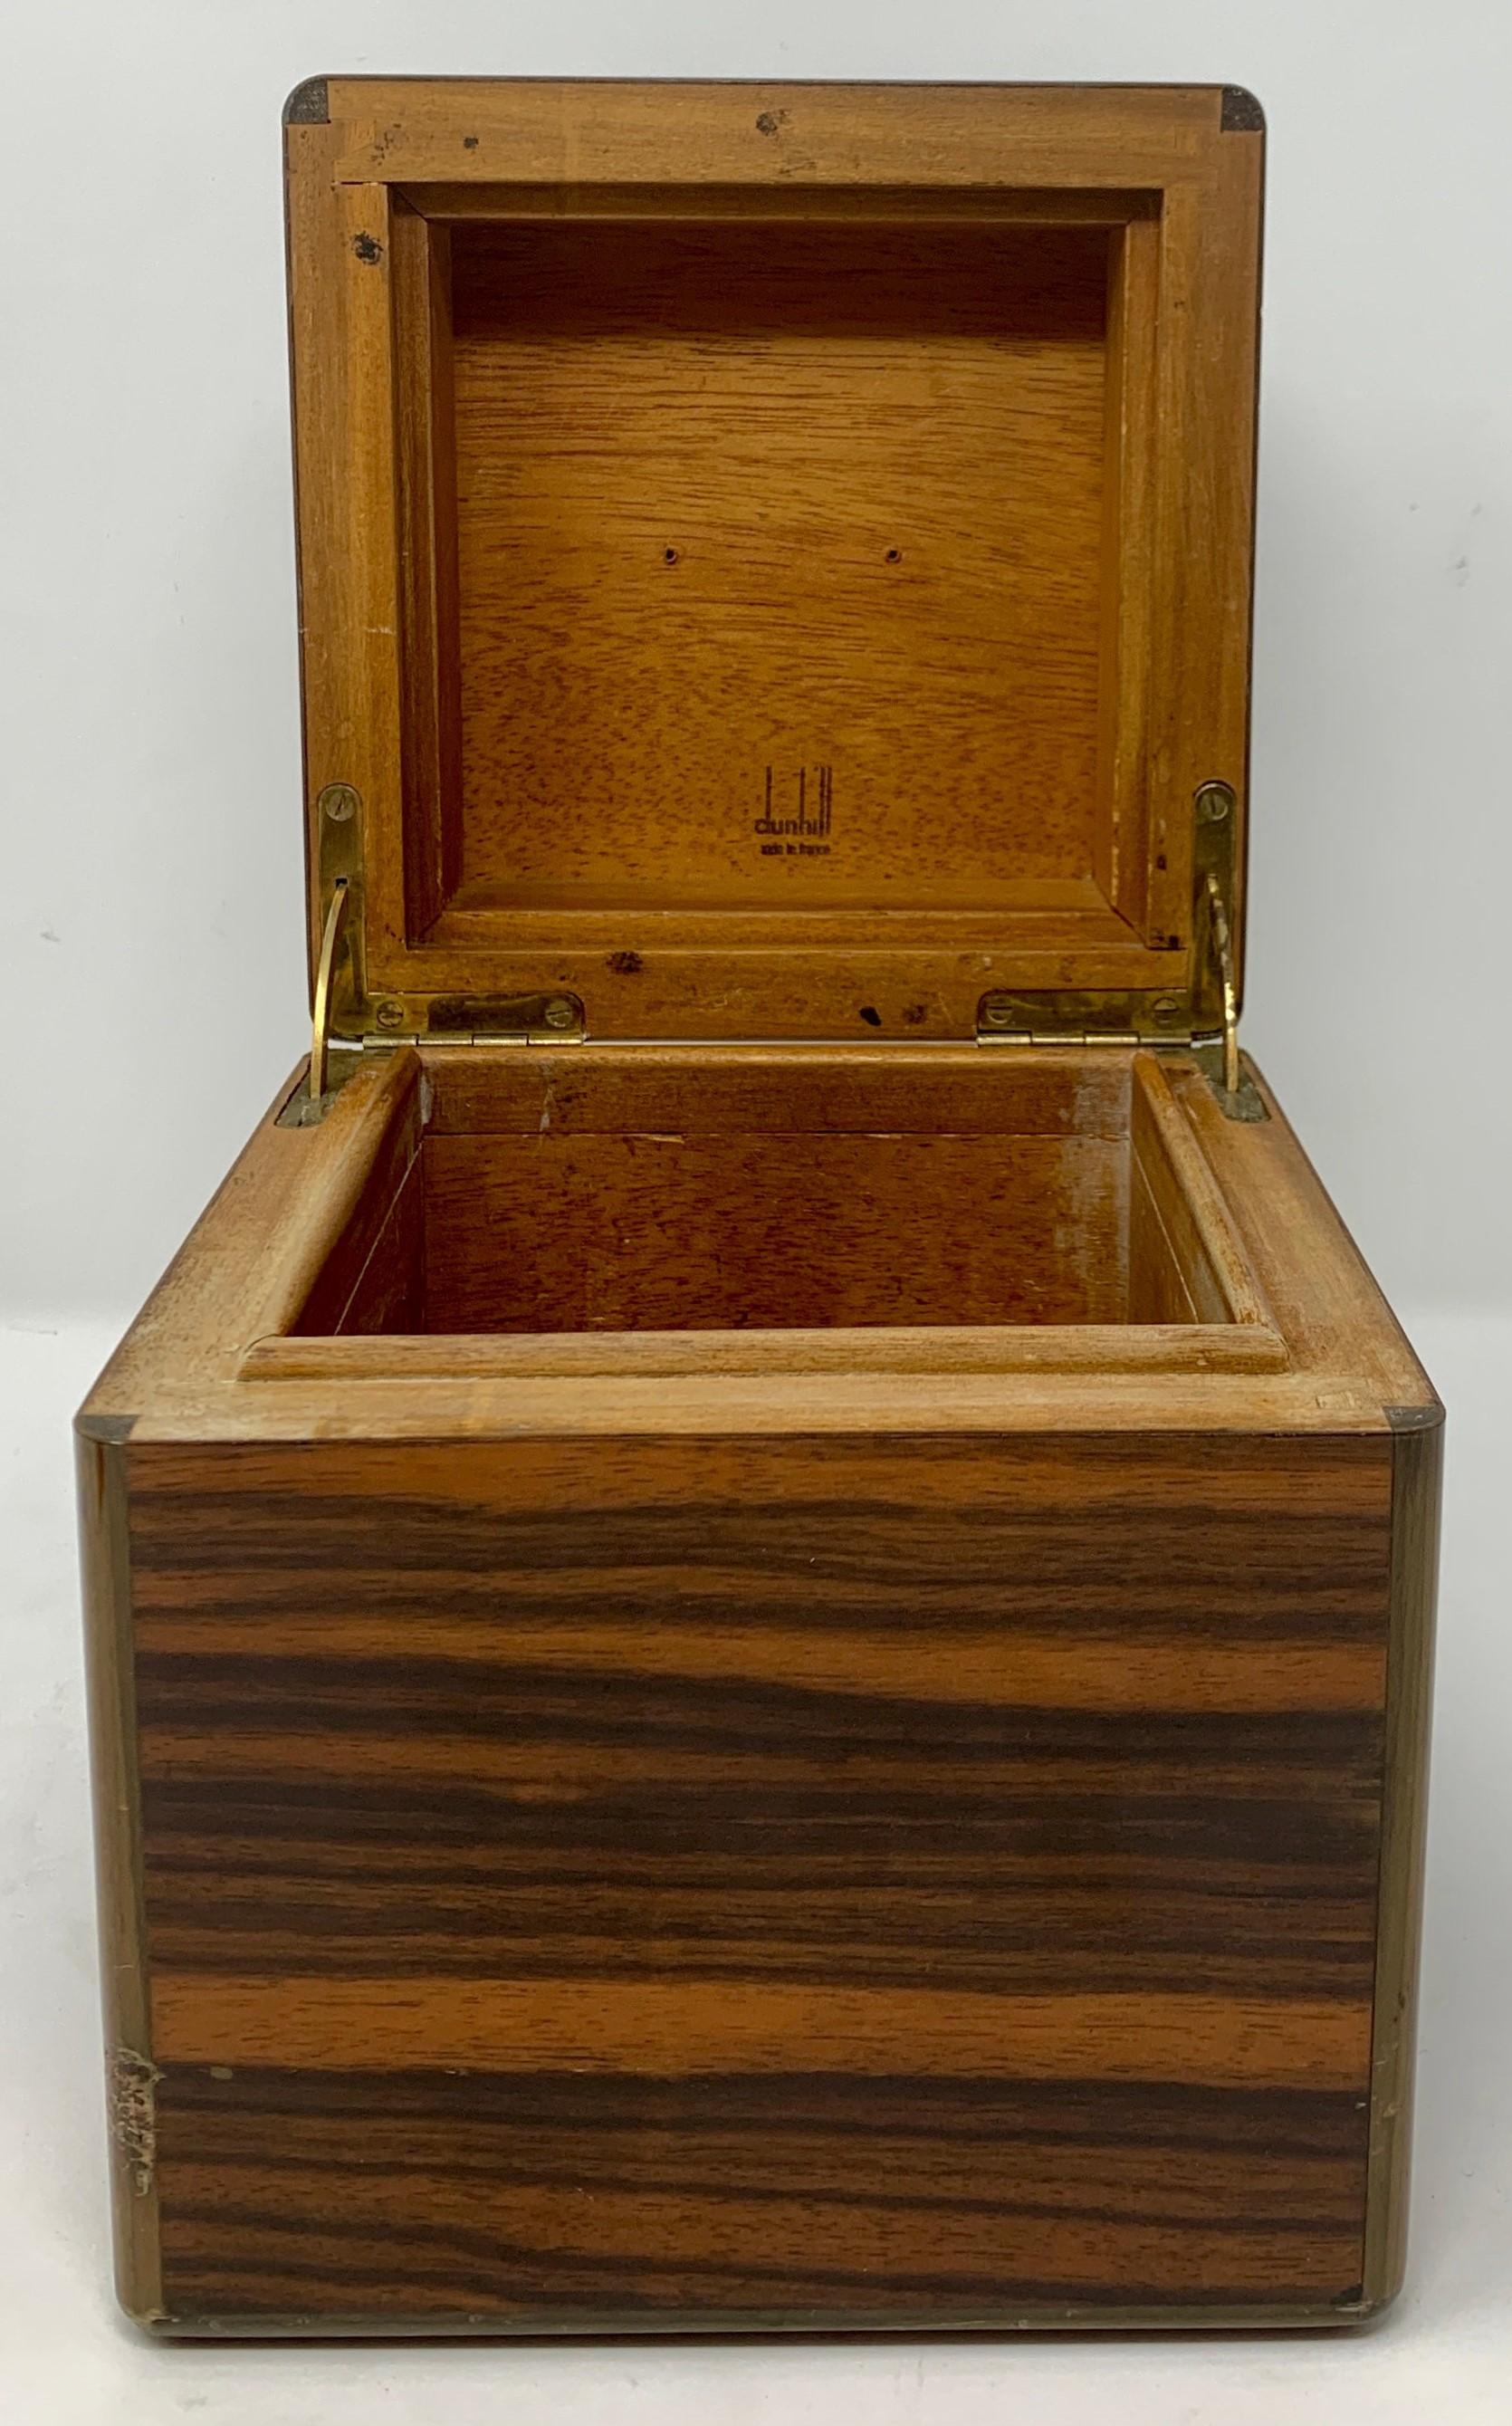 Antique French Coromandel wood humidor made by Dunhill
FBX071.